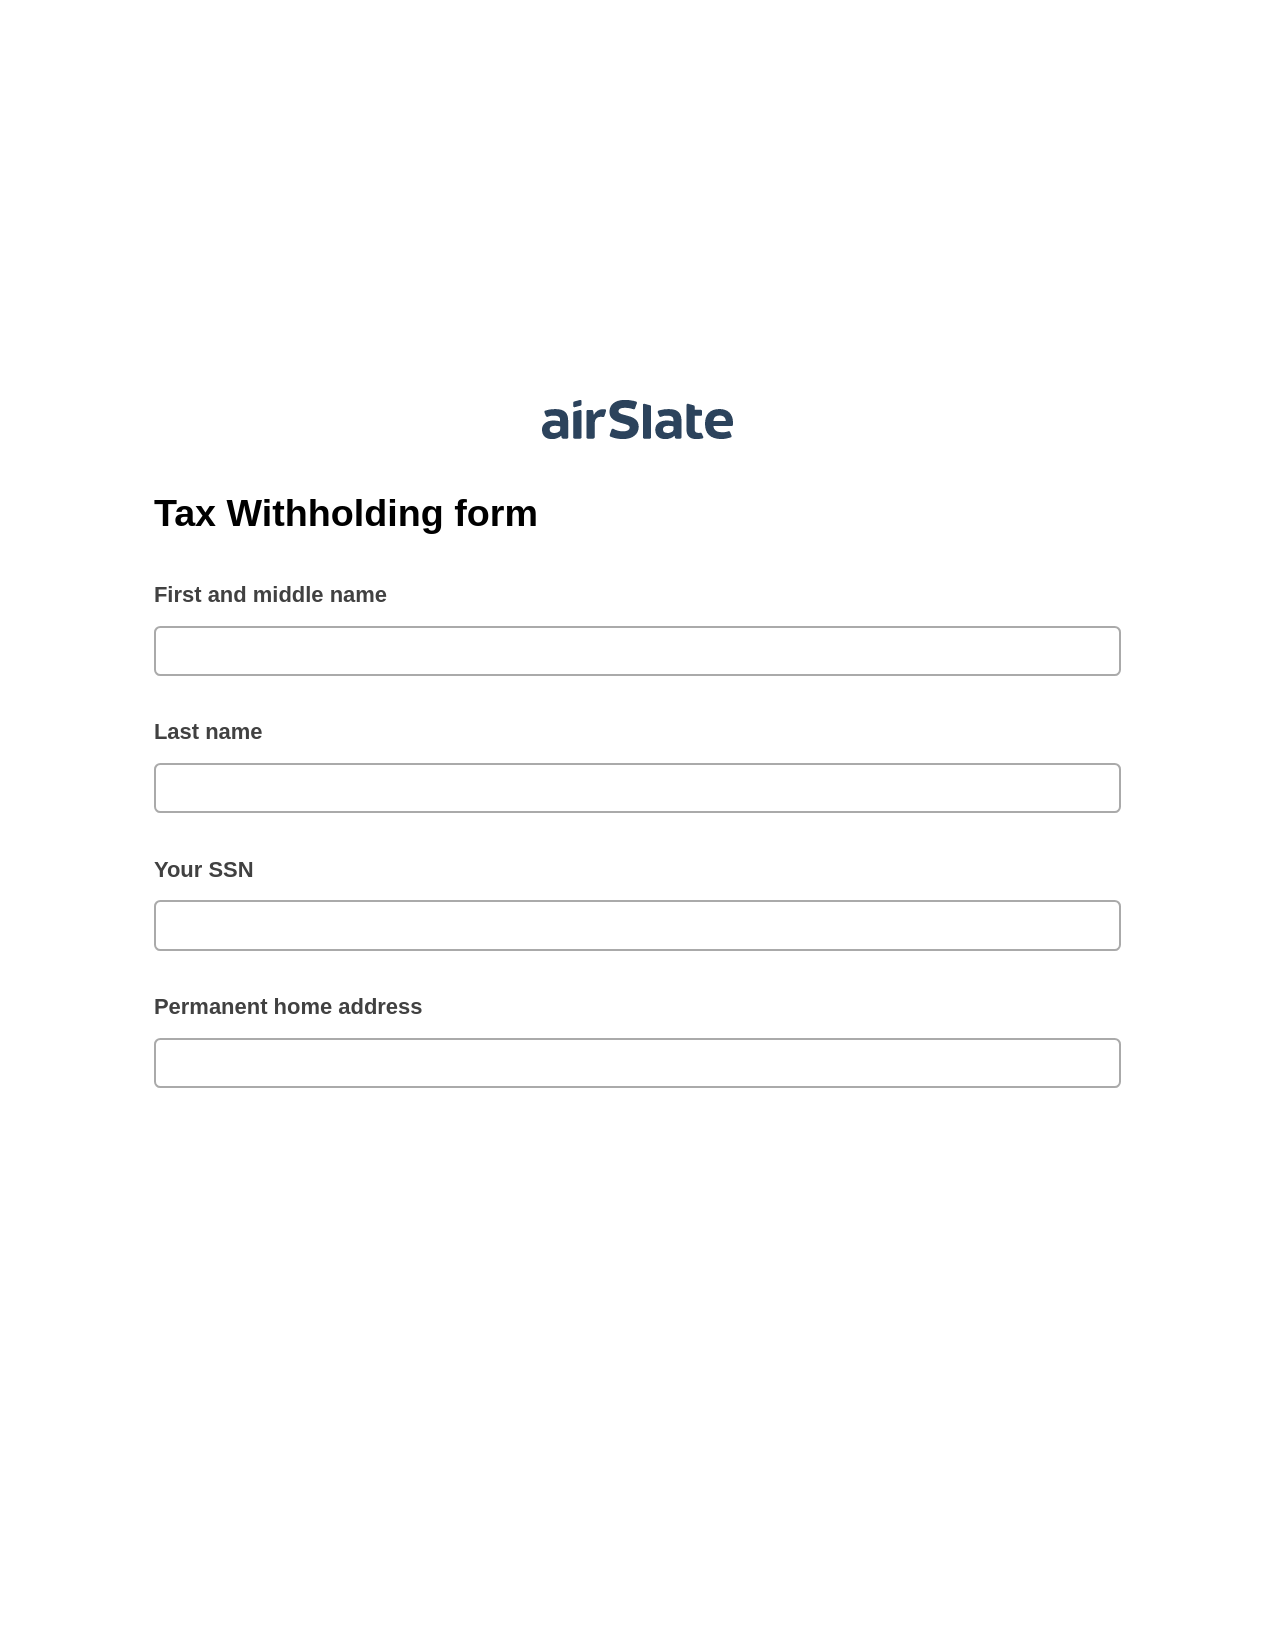 Multirole Tax Withholding form Pre-fill from Excel Spreadsheet Bot, Mailchimp Add Recipient to Audience Bot, Archive to SharePoint Folder Bot